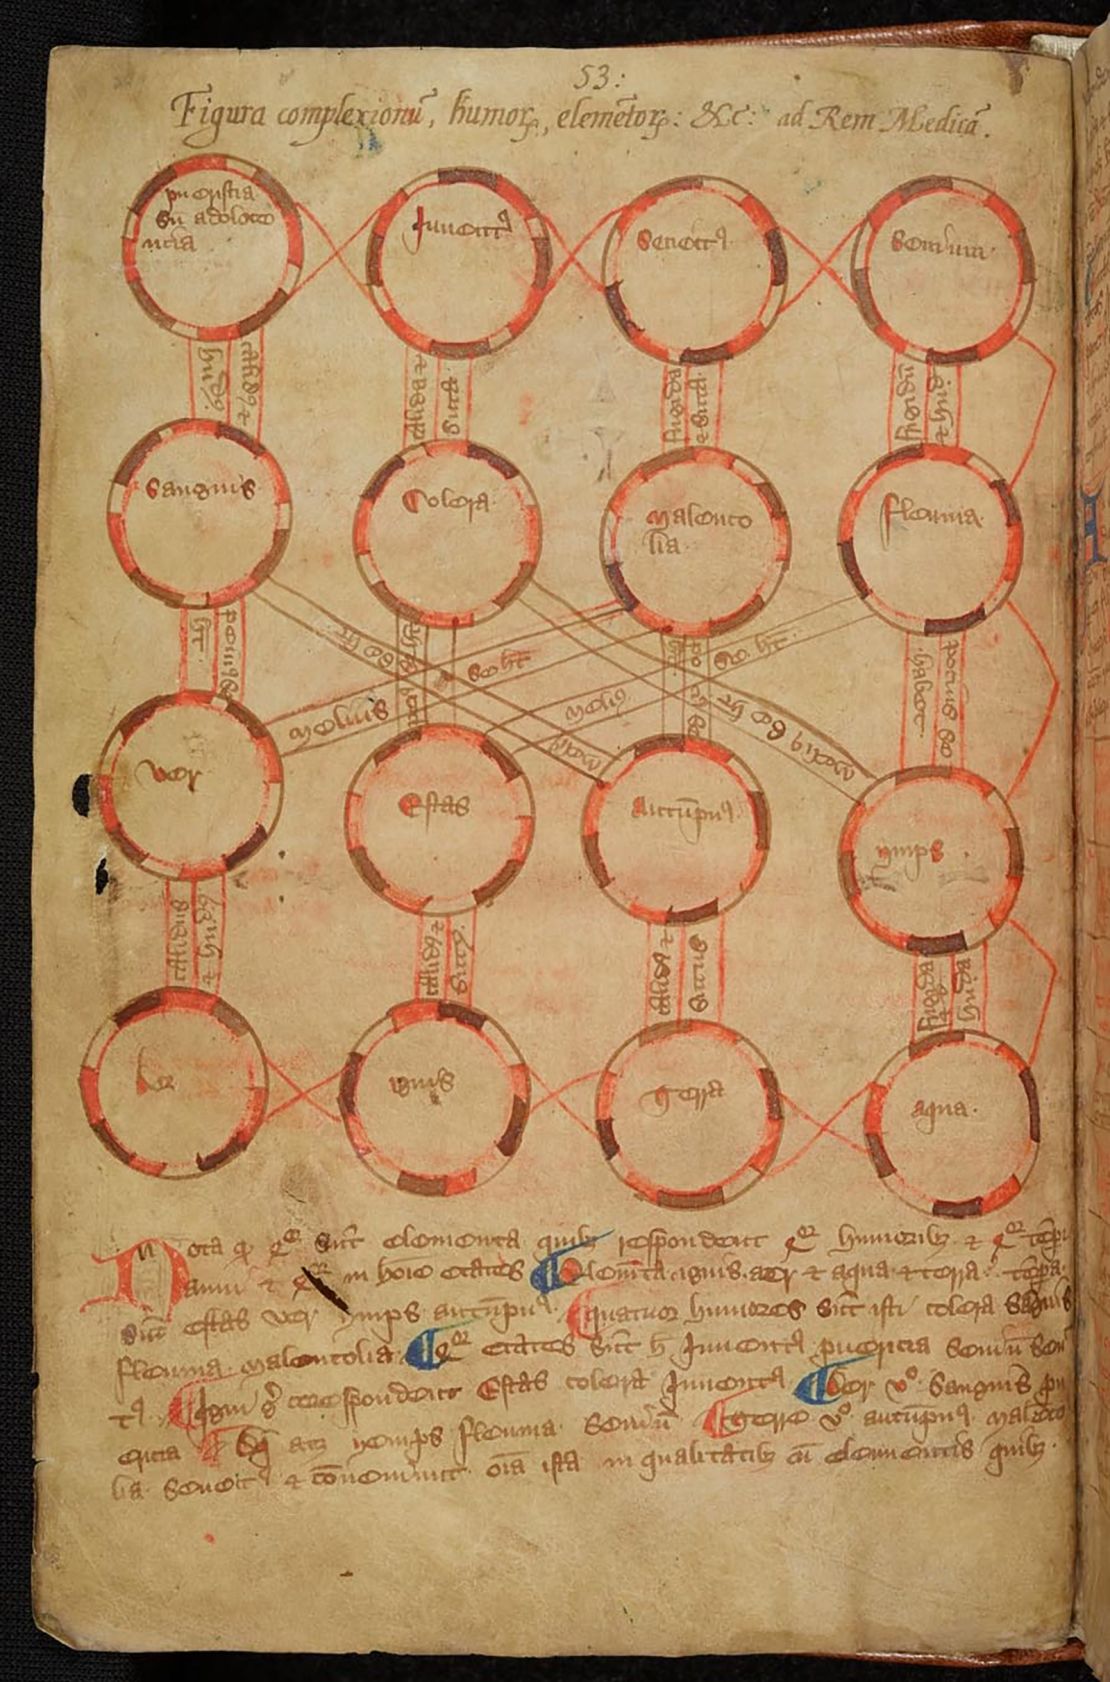 Diagnostic diagram linking a patient's age, temperament, the seasons and the elements, 14th century 